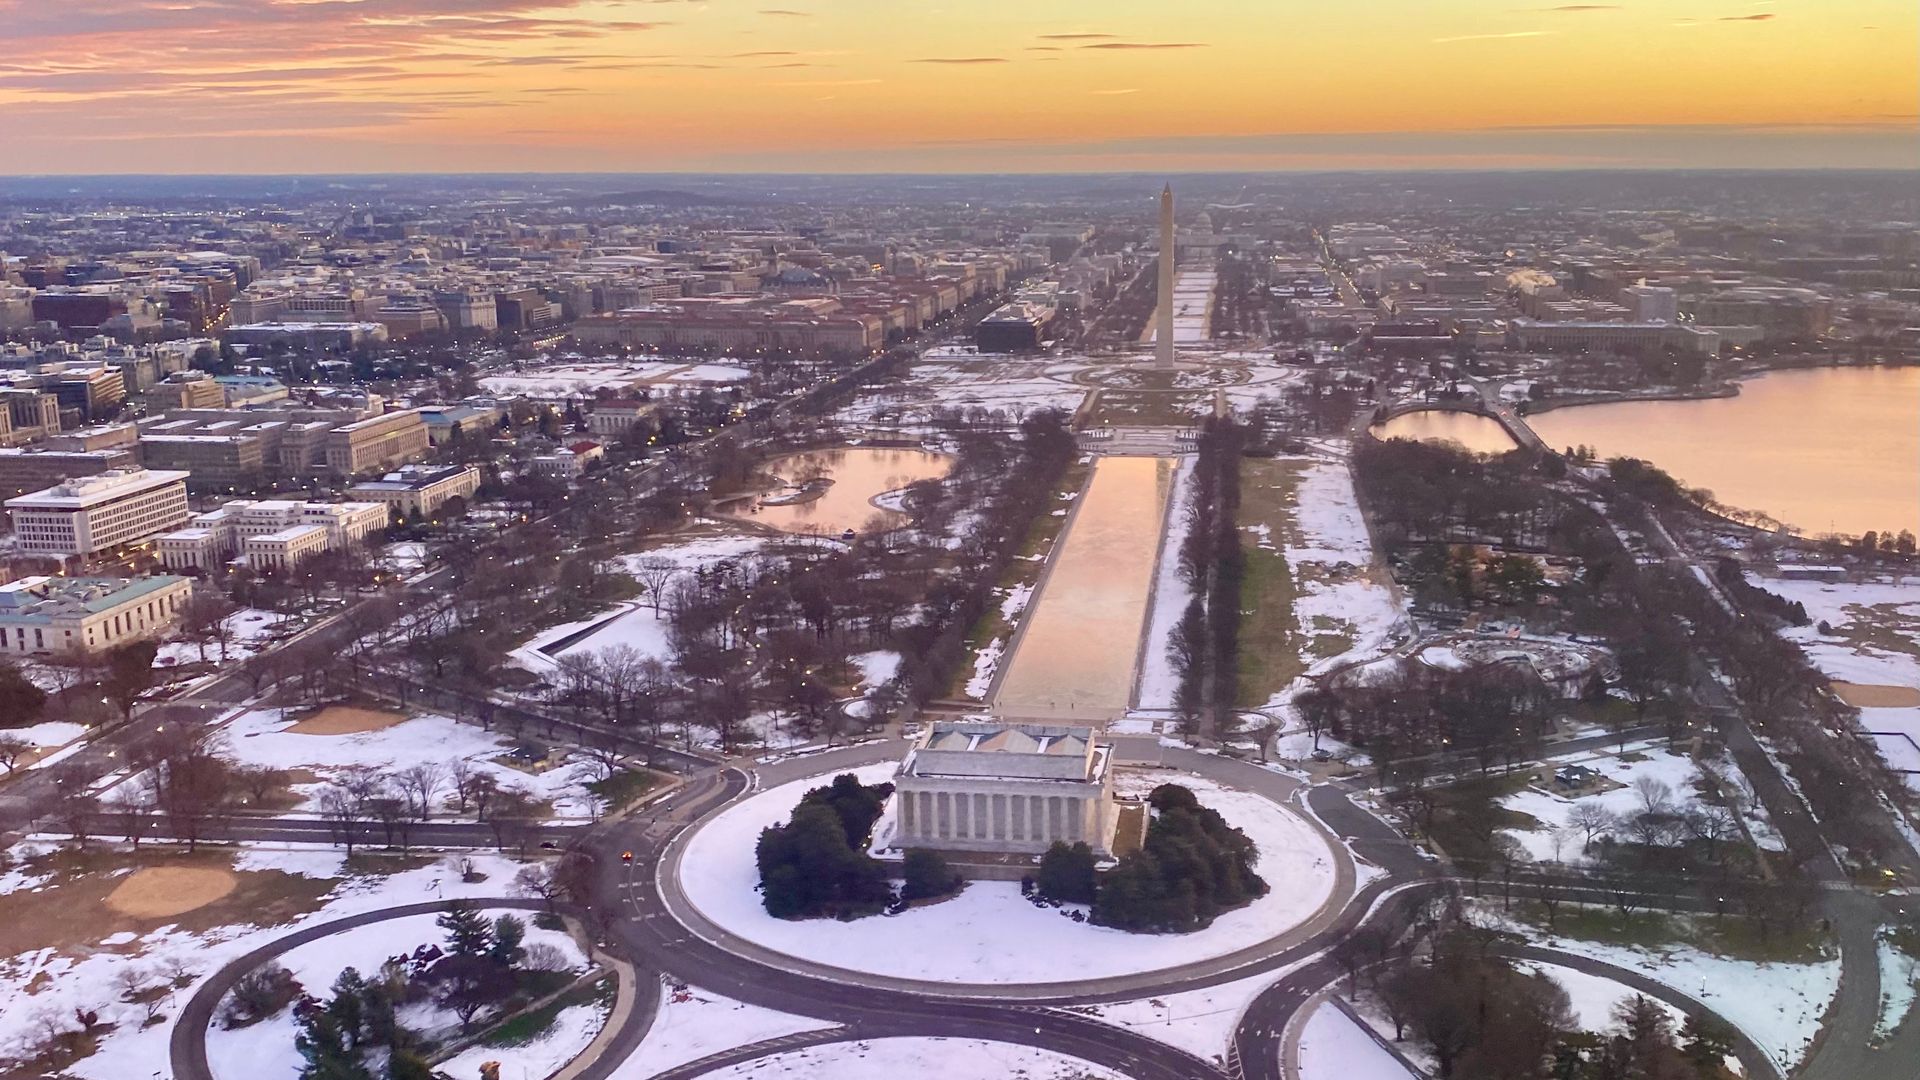 The sun is seen rising behind the Lincoln Memorial and National Mall.